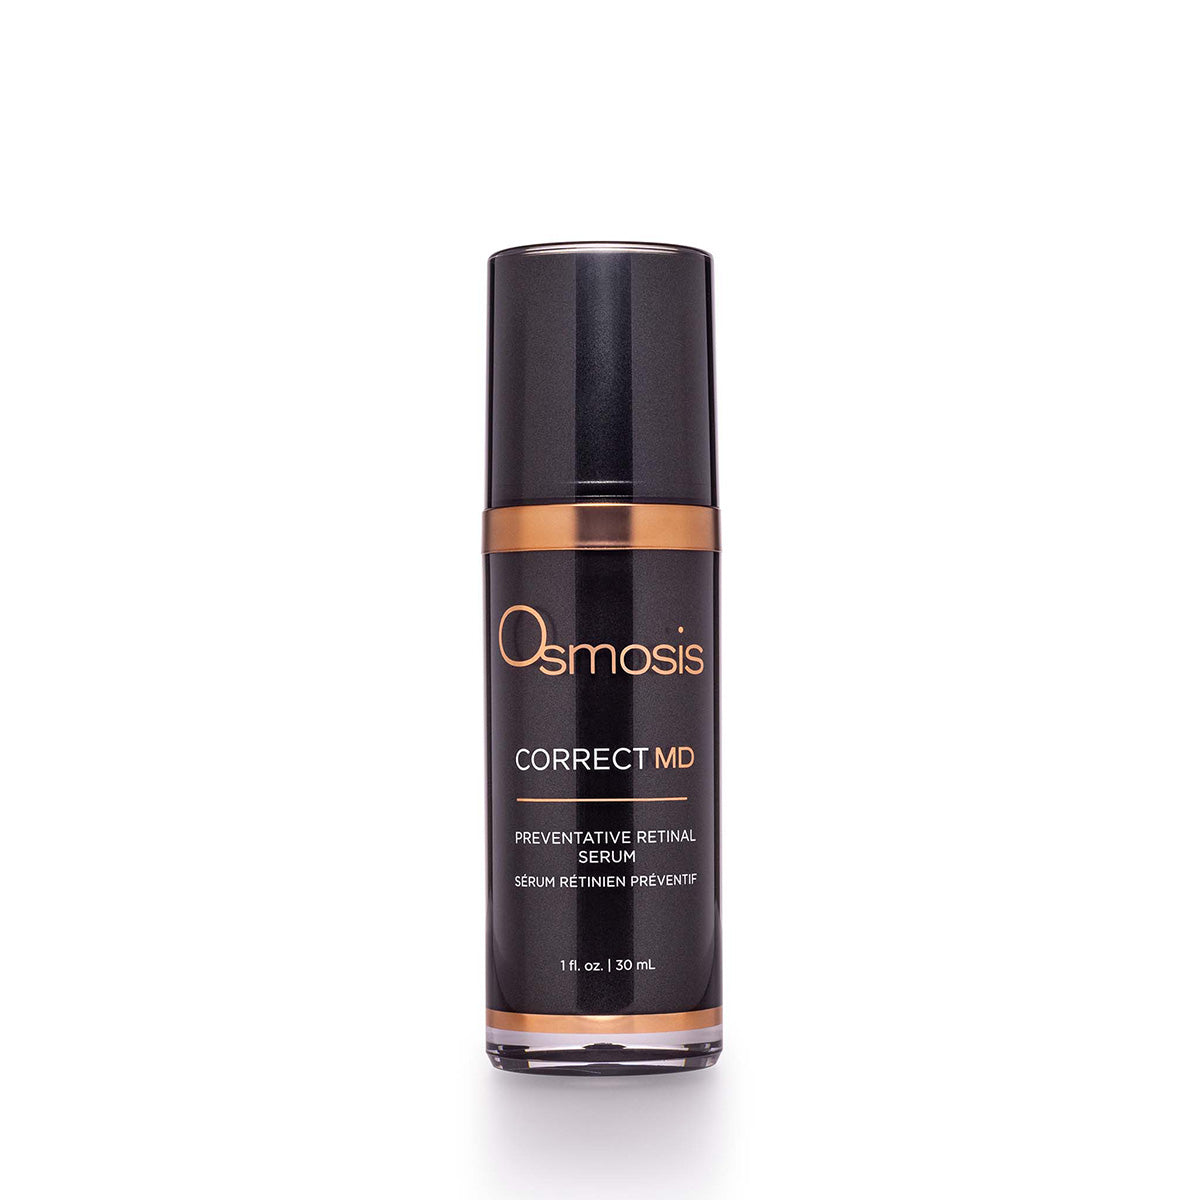 Osmosis Skincare  Correct MD Serum is a vitamin A serum that helps improve the signs of aging.